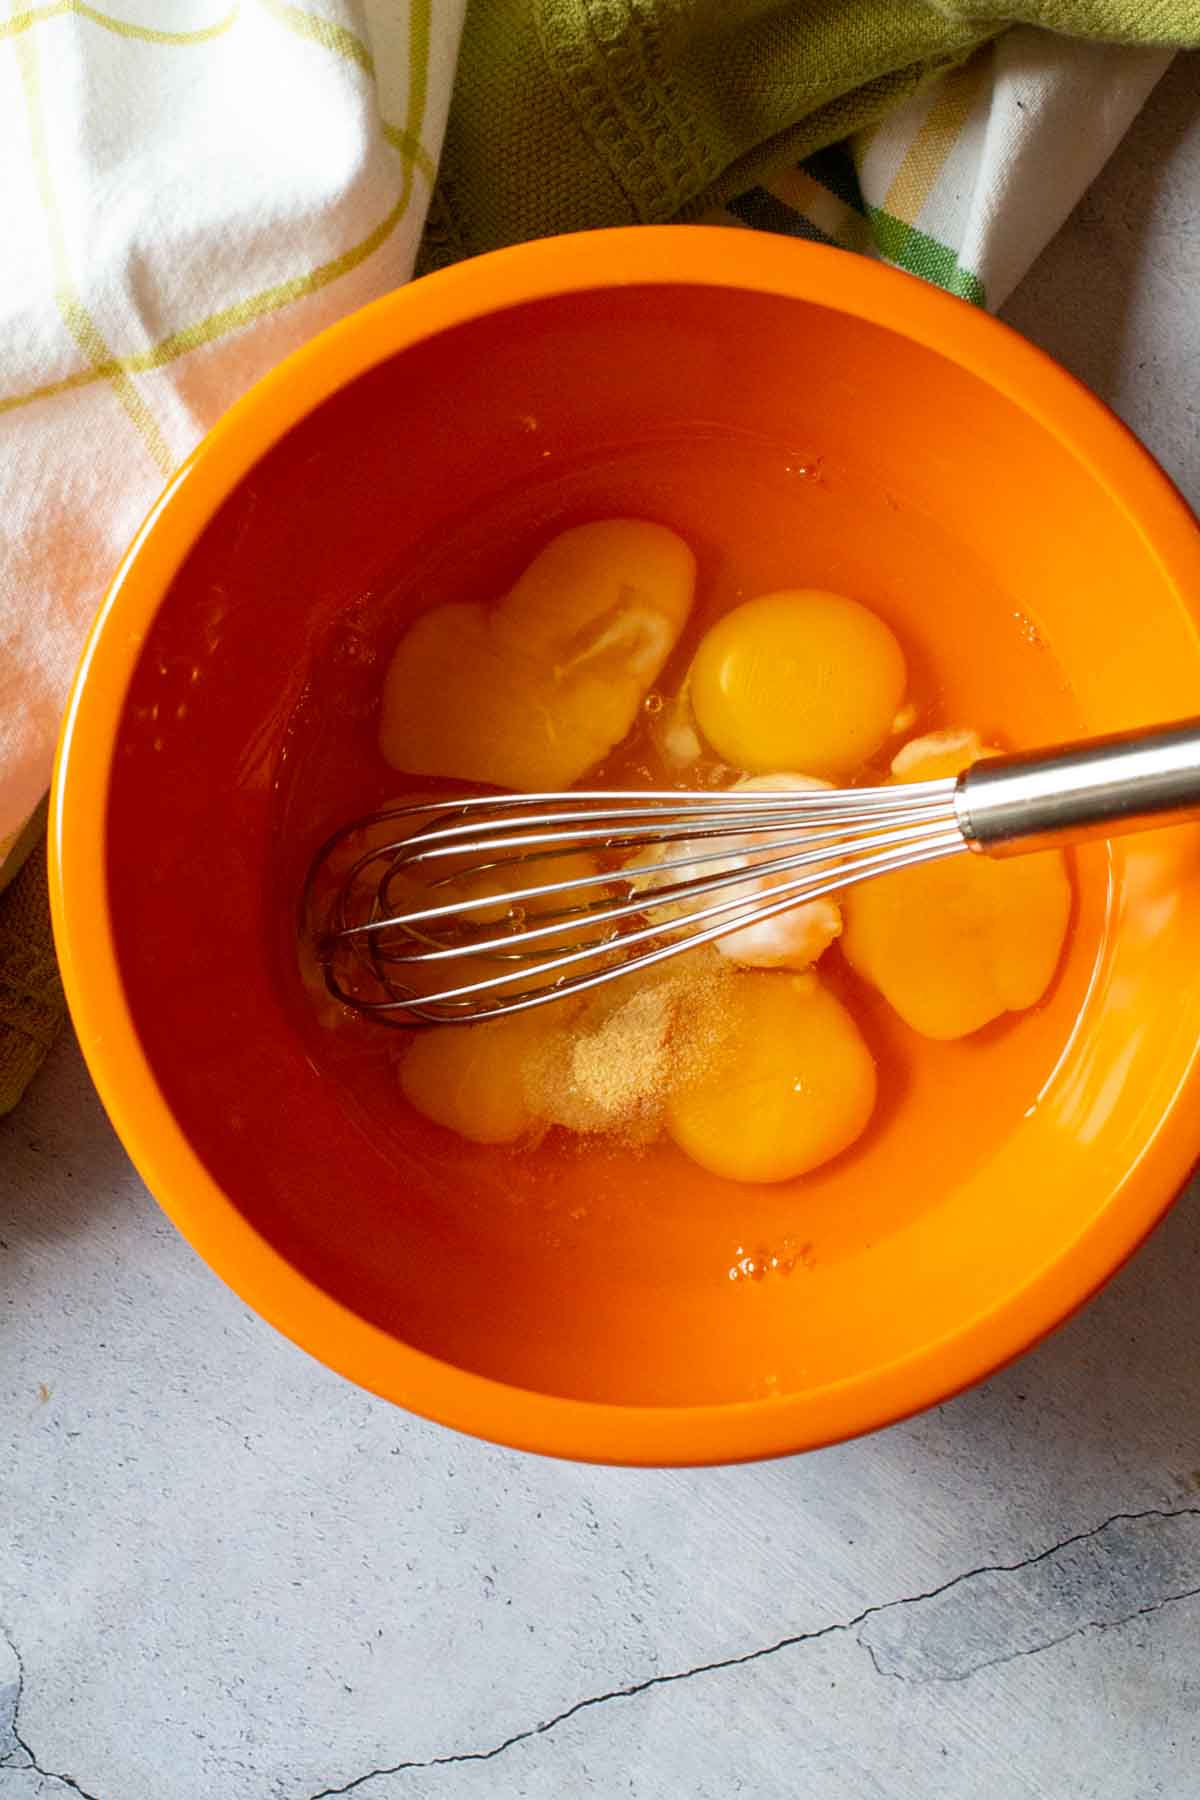 Eggs in a bowl with a whisk to make scrambled eggs.